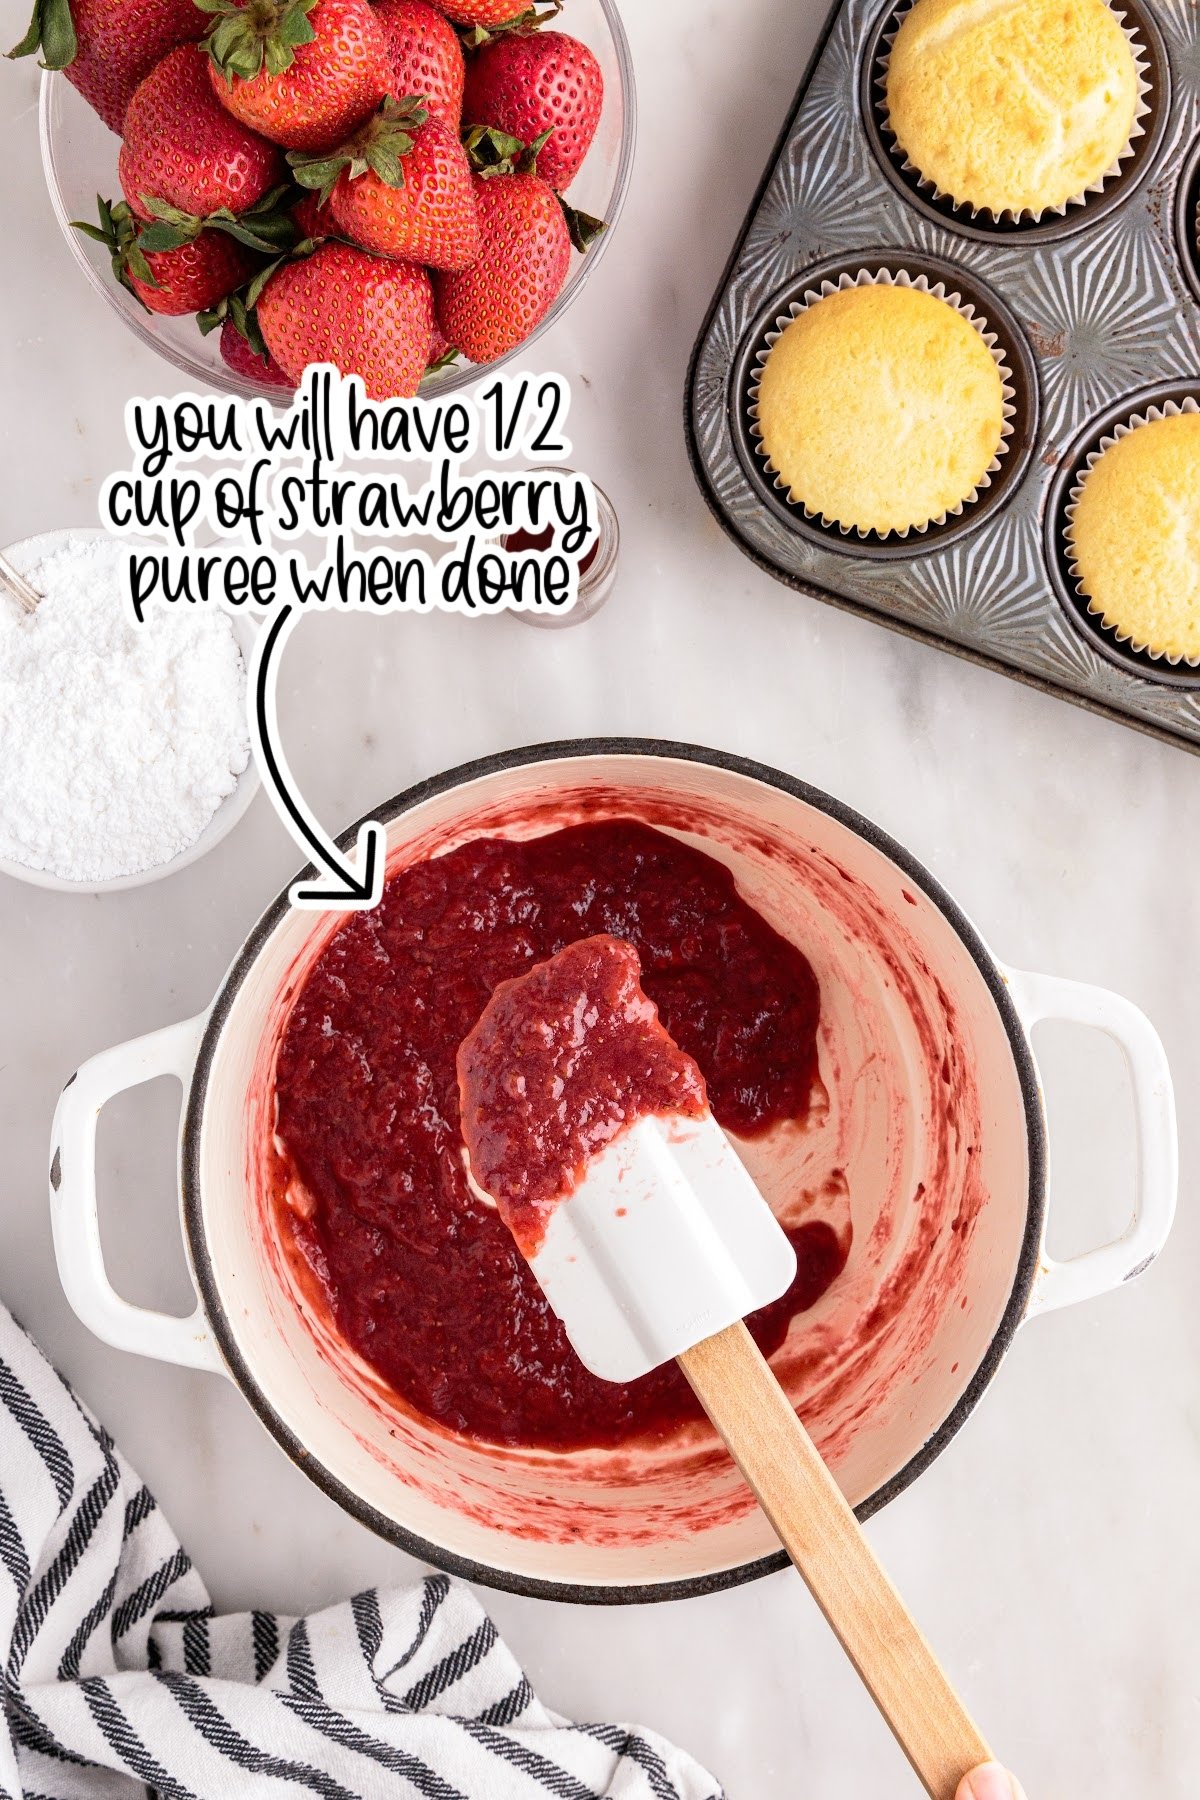 Strawberry reduction in saucepan and on spatula with text overlay "you will have ½ cup of strawberry puree when done."